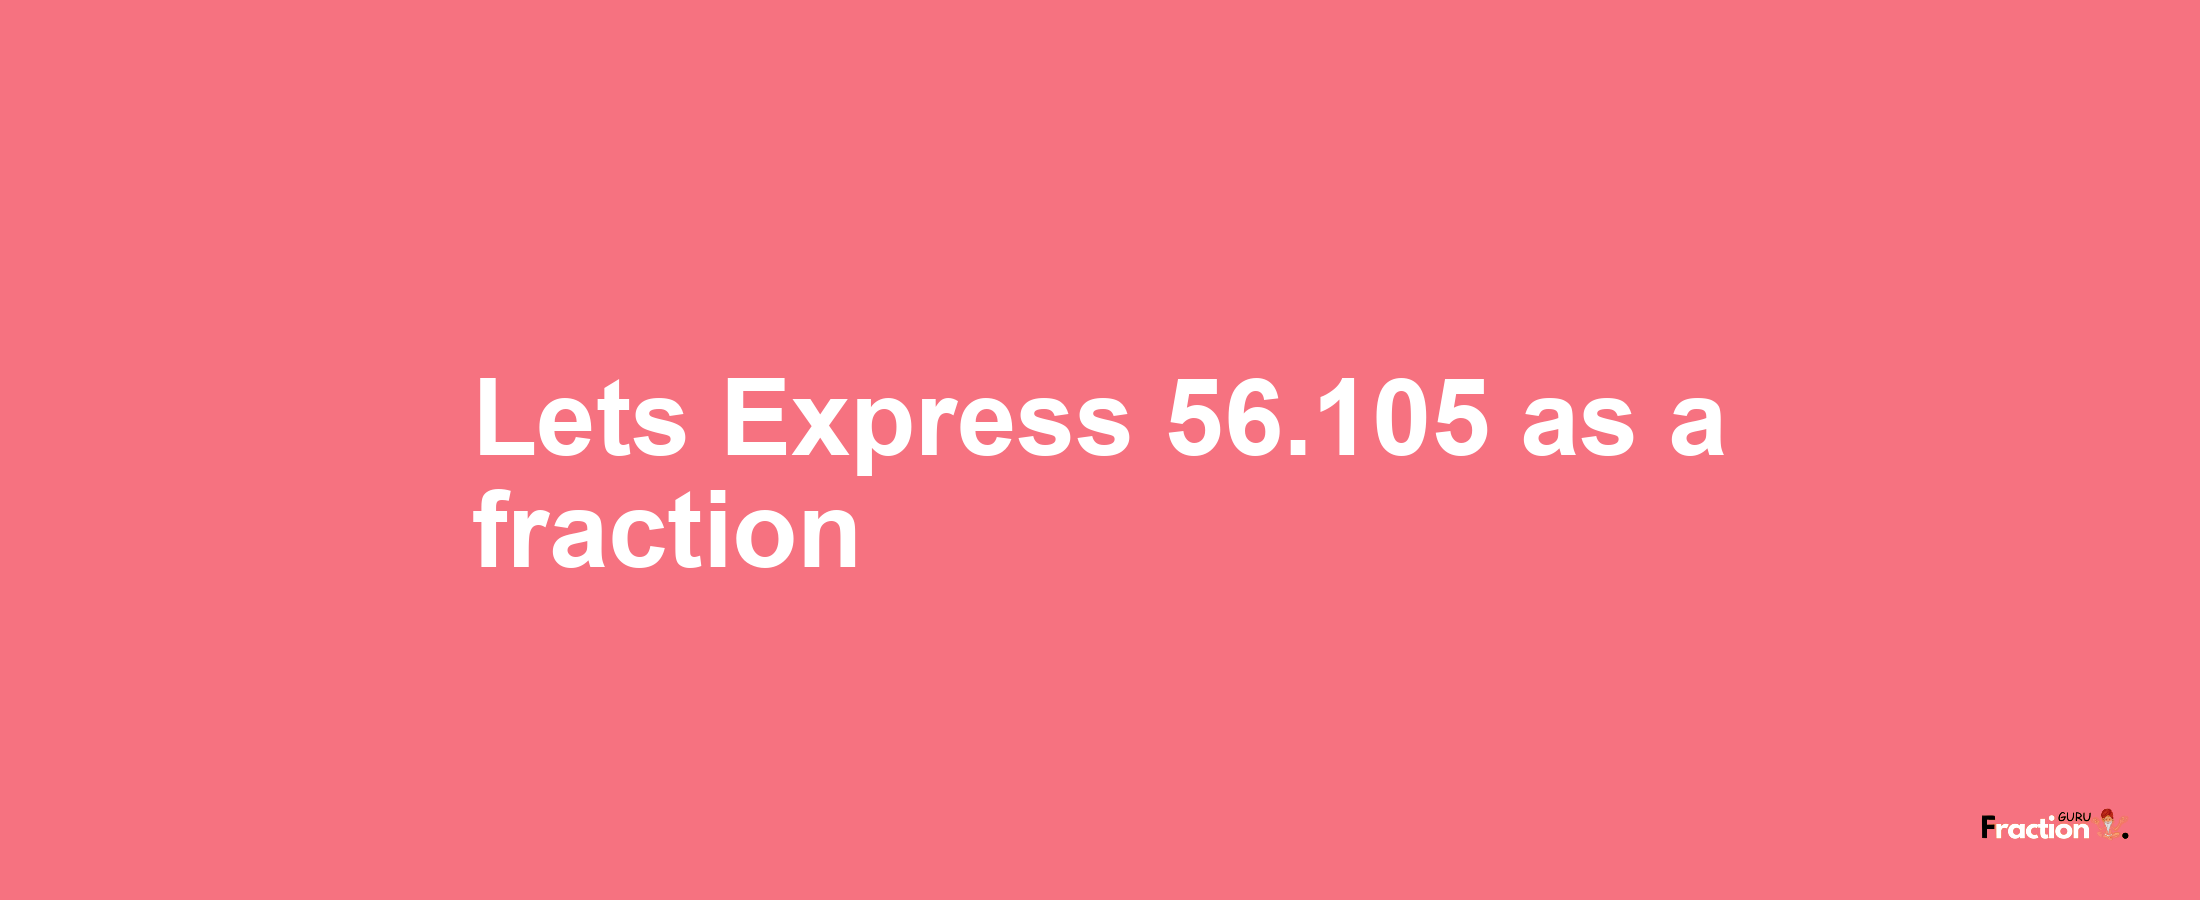 Lets Express 56.105 as afraction